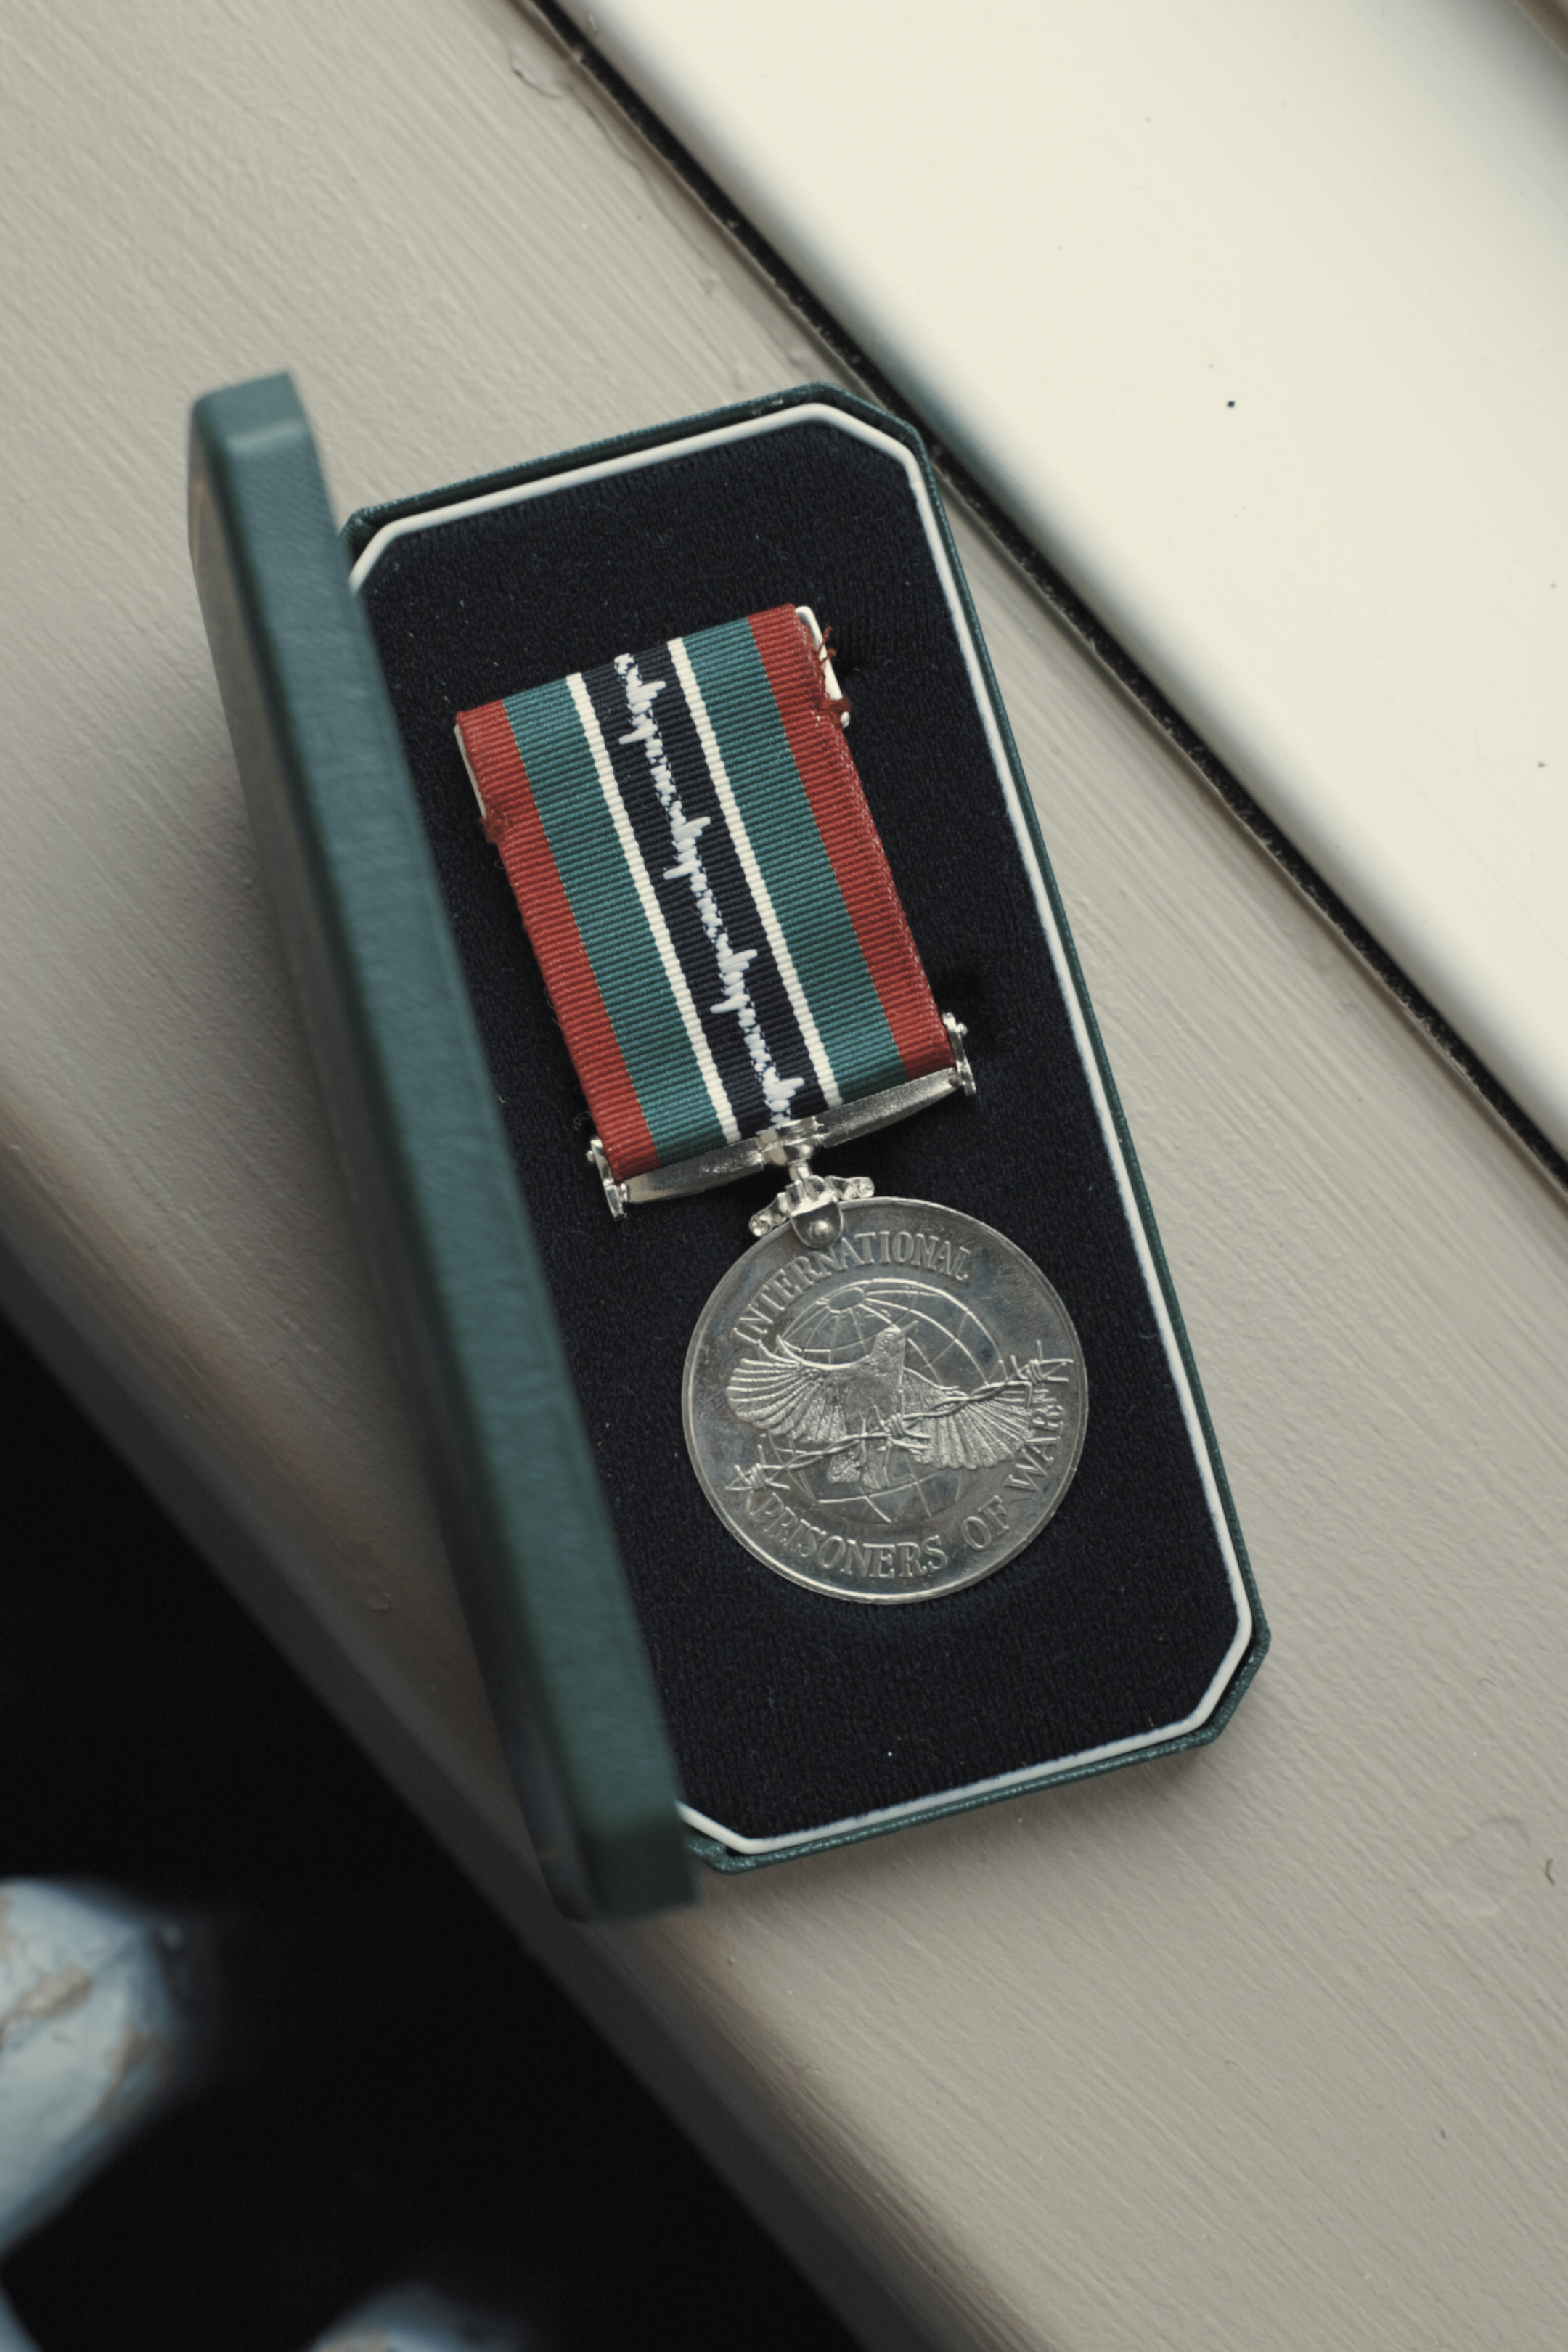 Image shows a commemorative Allied Ex-Prisoners of War medal.